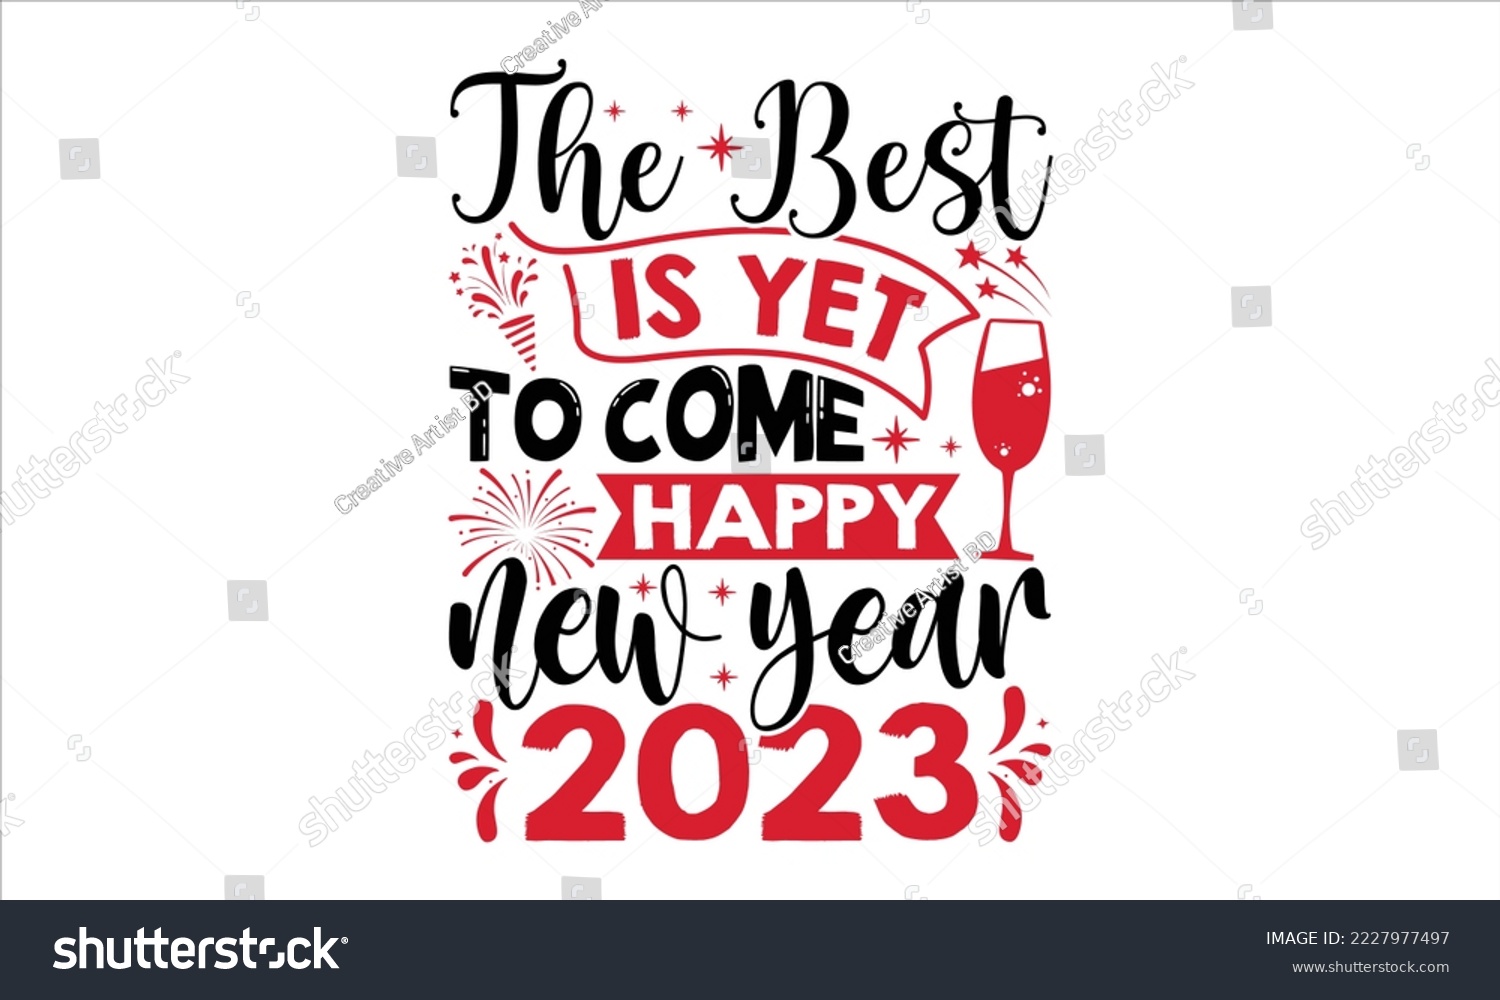 SVG of The Best Is Yet To Come Happy New Year 2023  - Happy New Year  T shirt Design, Modern calligraphy, Cut Files for Cricut Svg, Illustration for prints on bags, posters svg